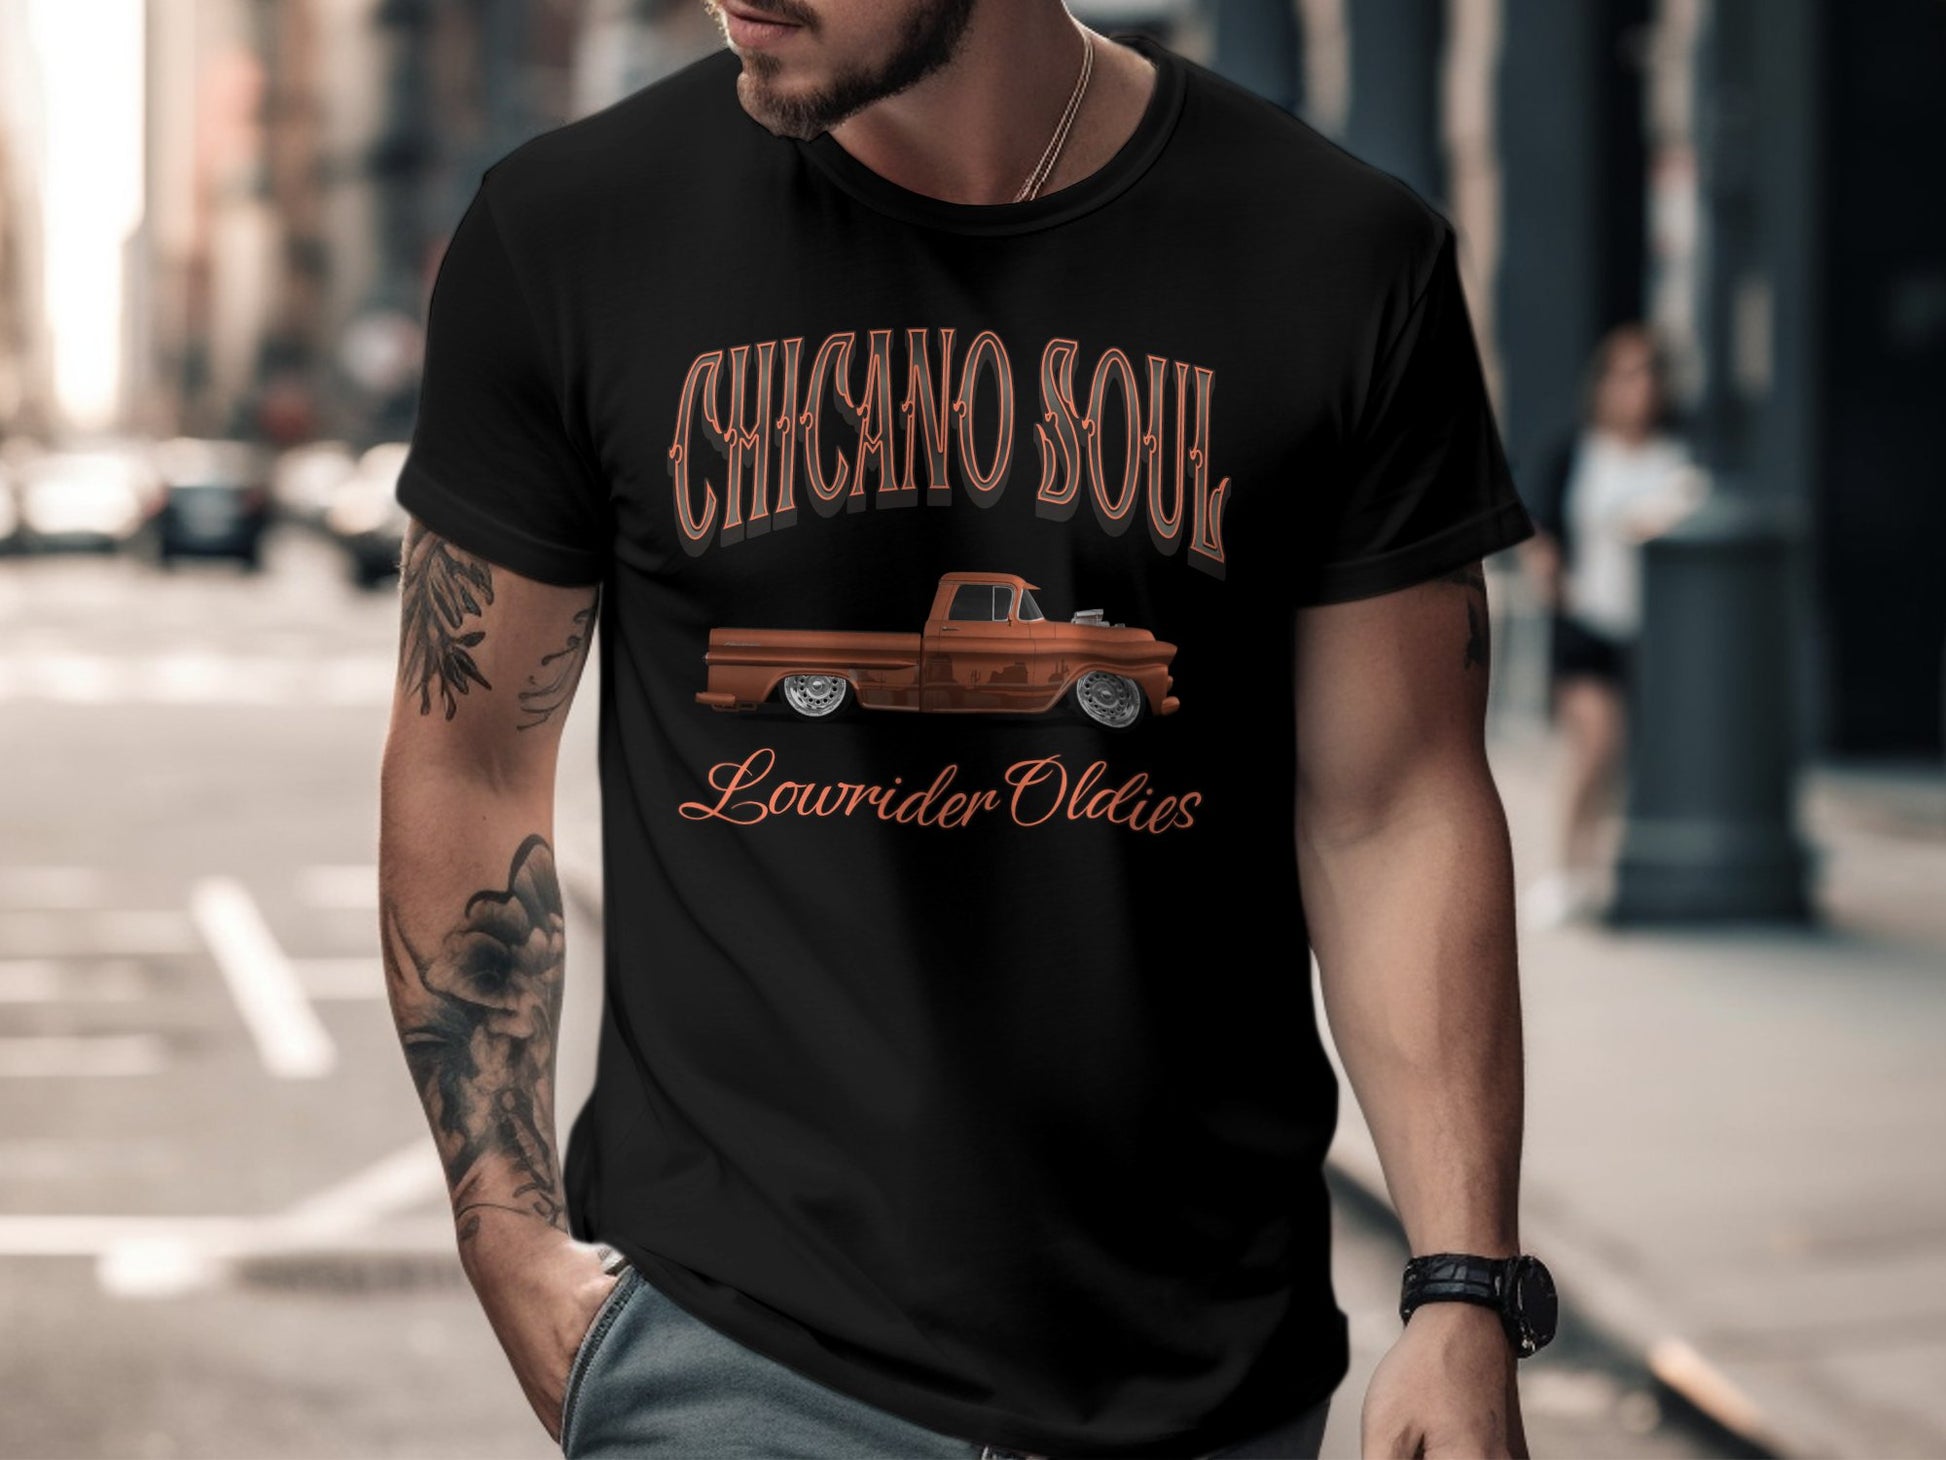 Chicano Soul Lowrider Oldies Vintage Truck Graphic Tee, Classic Car T-Shirt, Retro Style Apparel - Mardonyx